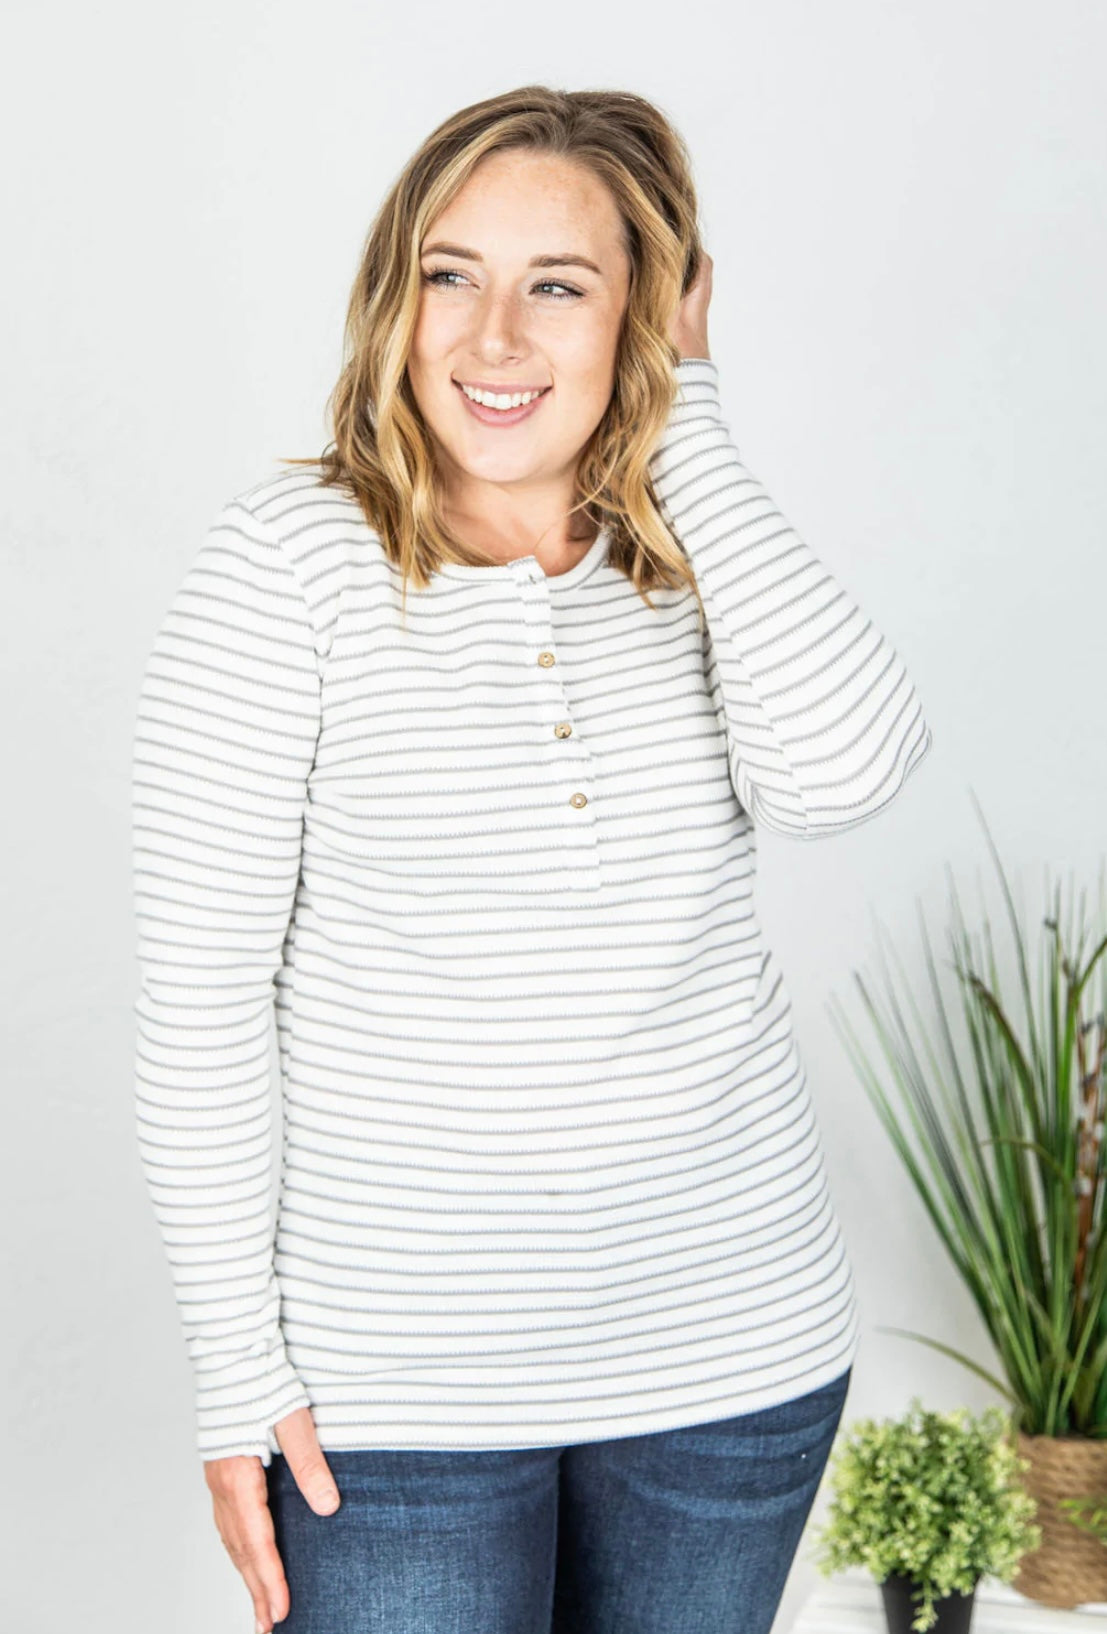 White long sleeve Henley with gray stripes